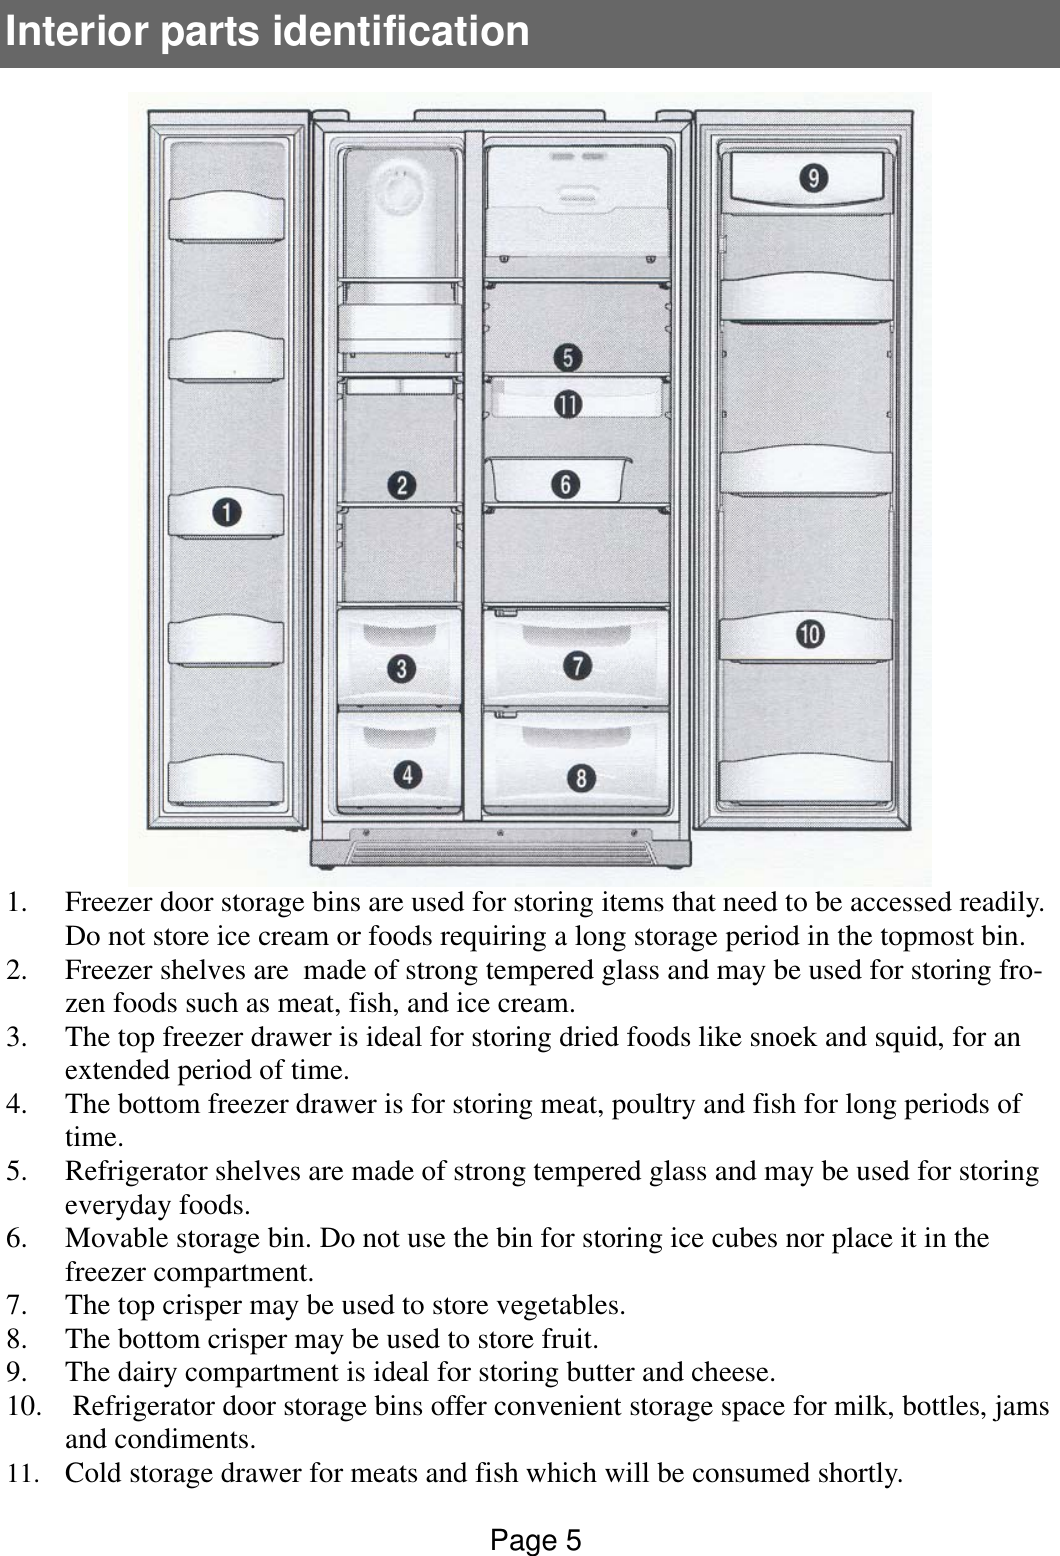 Page 5 of 12 - Defy Defy-Side-By-Side-Frost-Free-Refrigerator-Freezer-570-Users-Manual- 570 LITRE SIDE X DFF389 AND 390  Defy-side-by-side-frost-free-refrigerator-freezer-570-users-manual